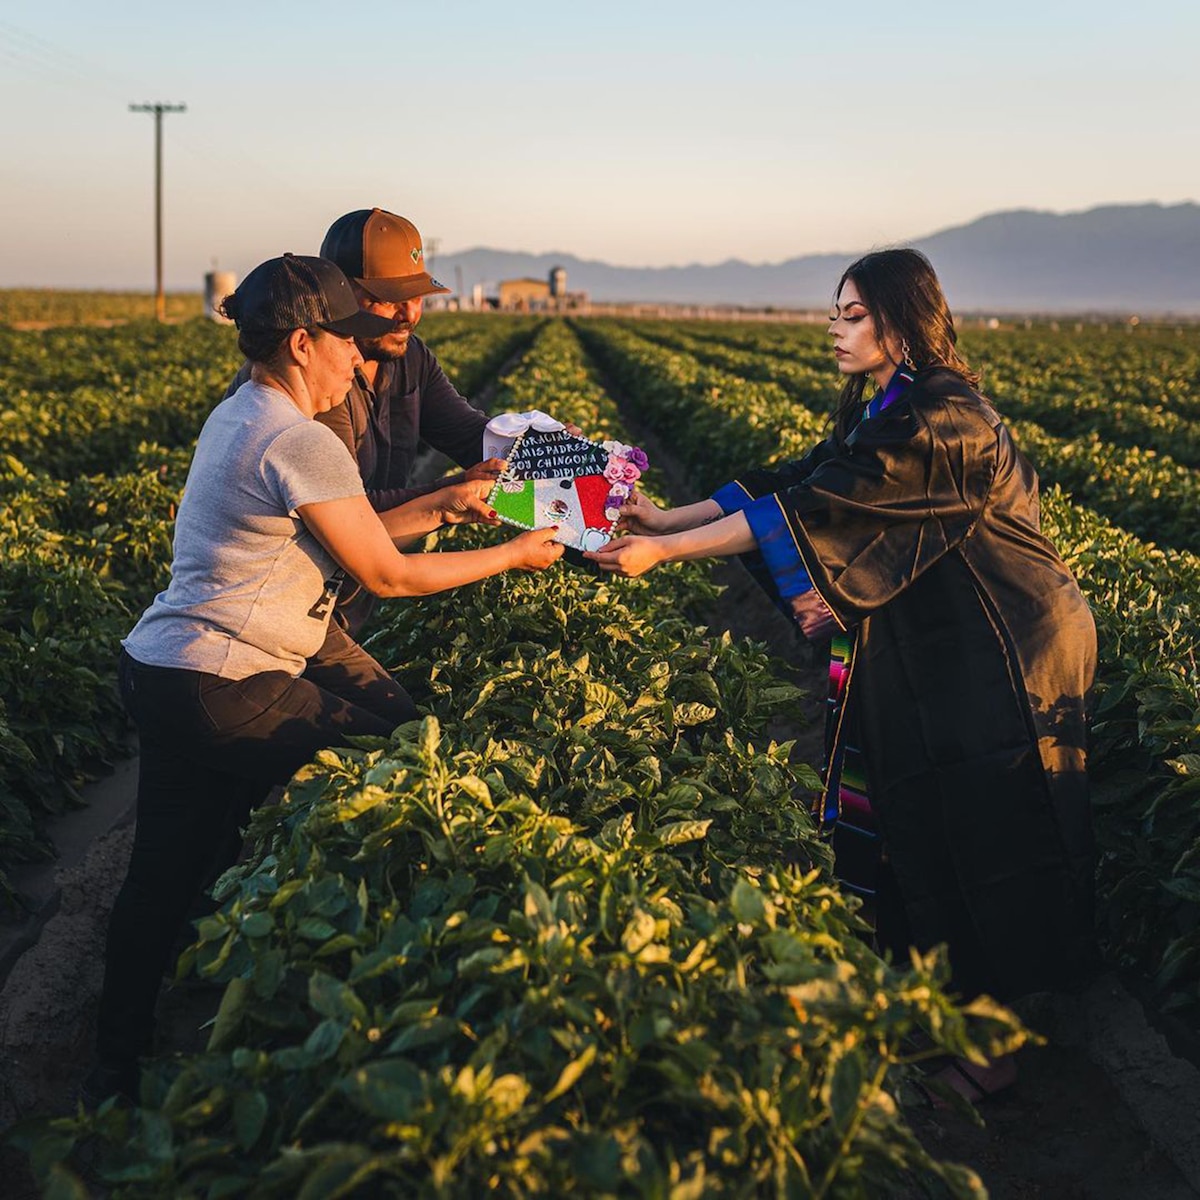 Jennifer Rocha and Her Parents in Produce Fields